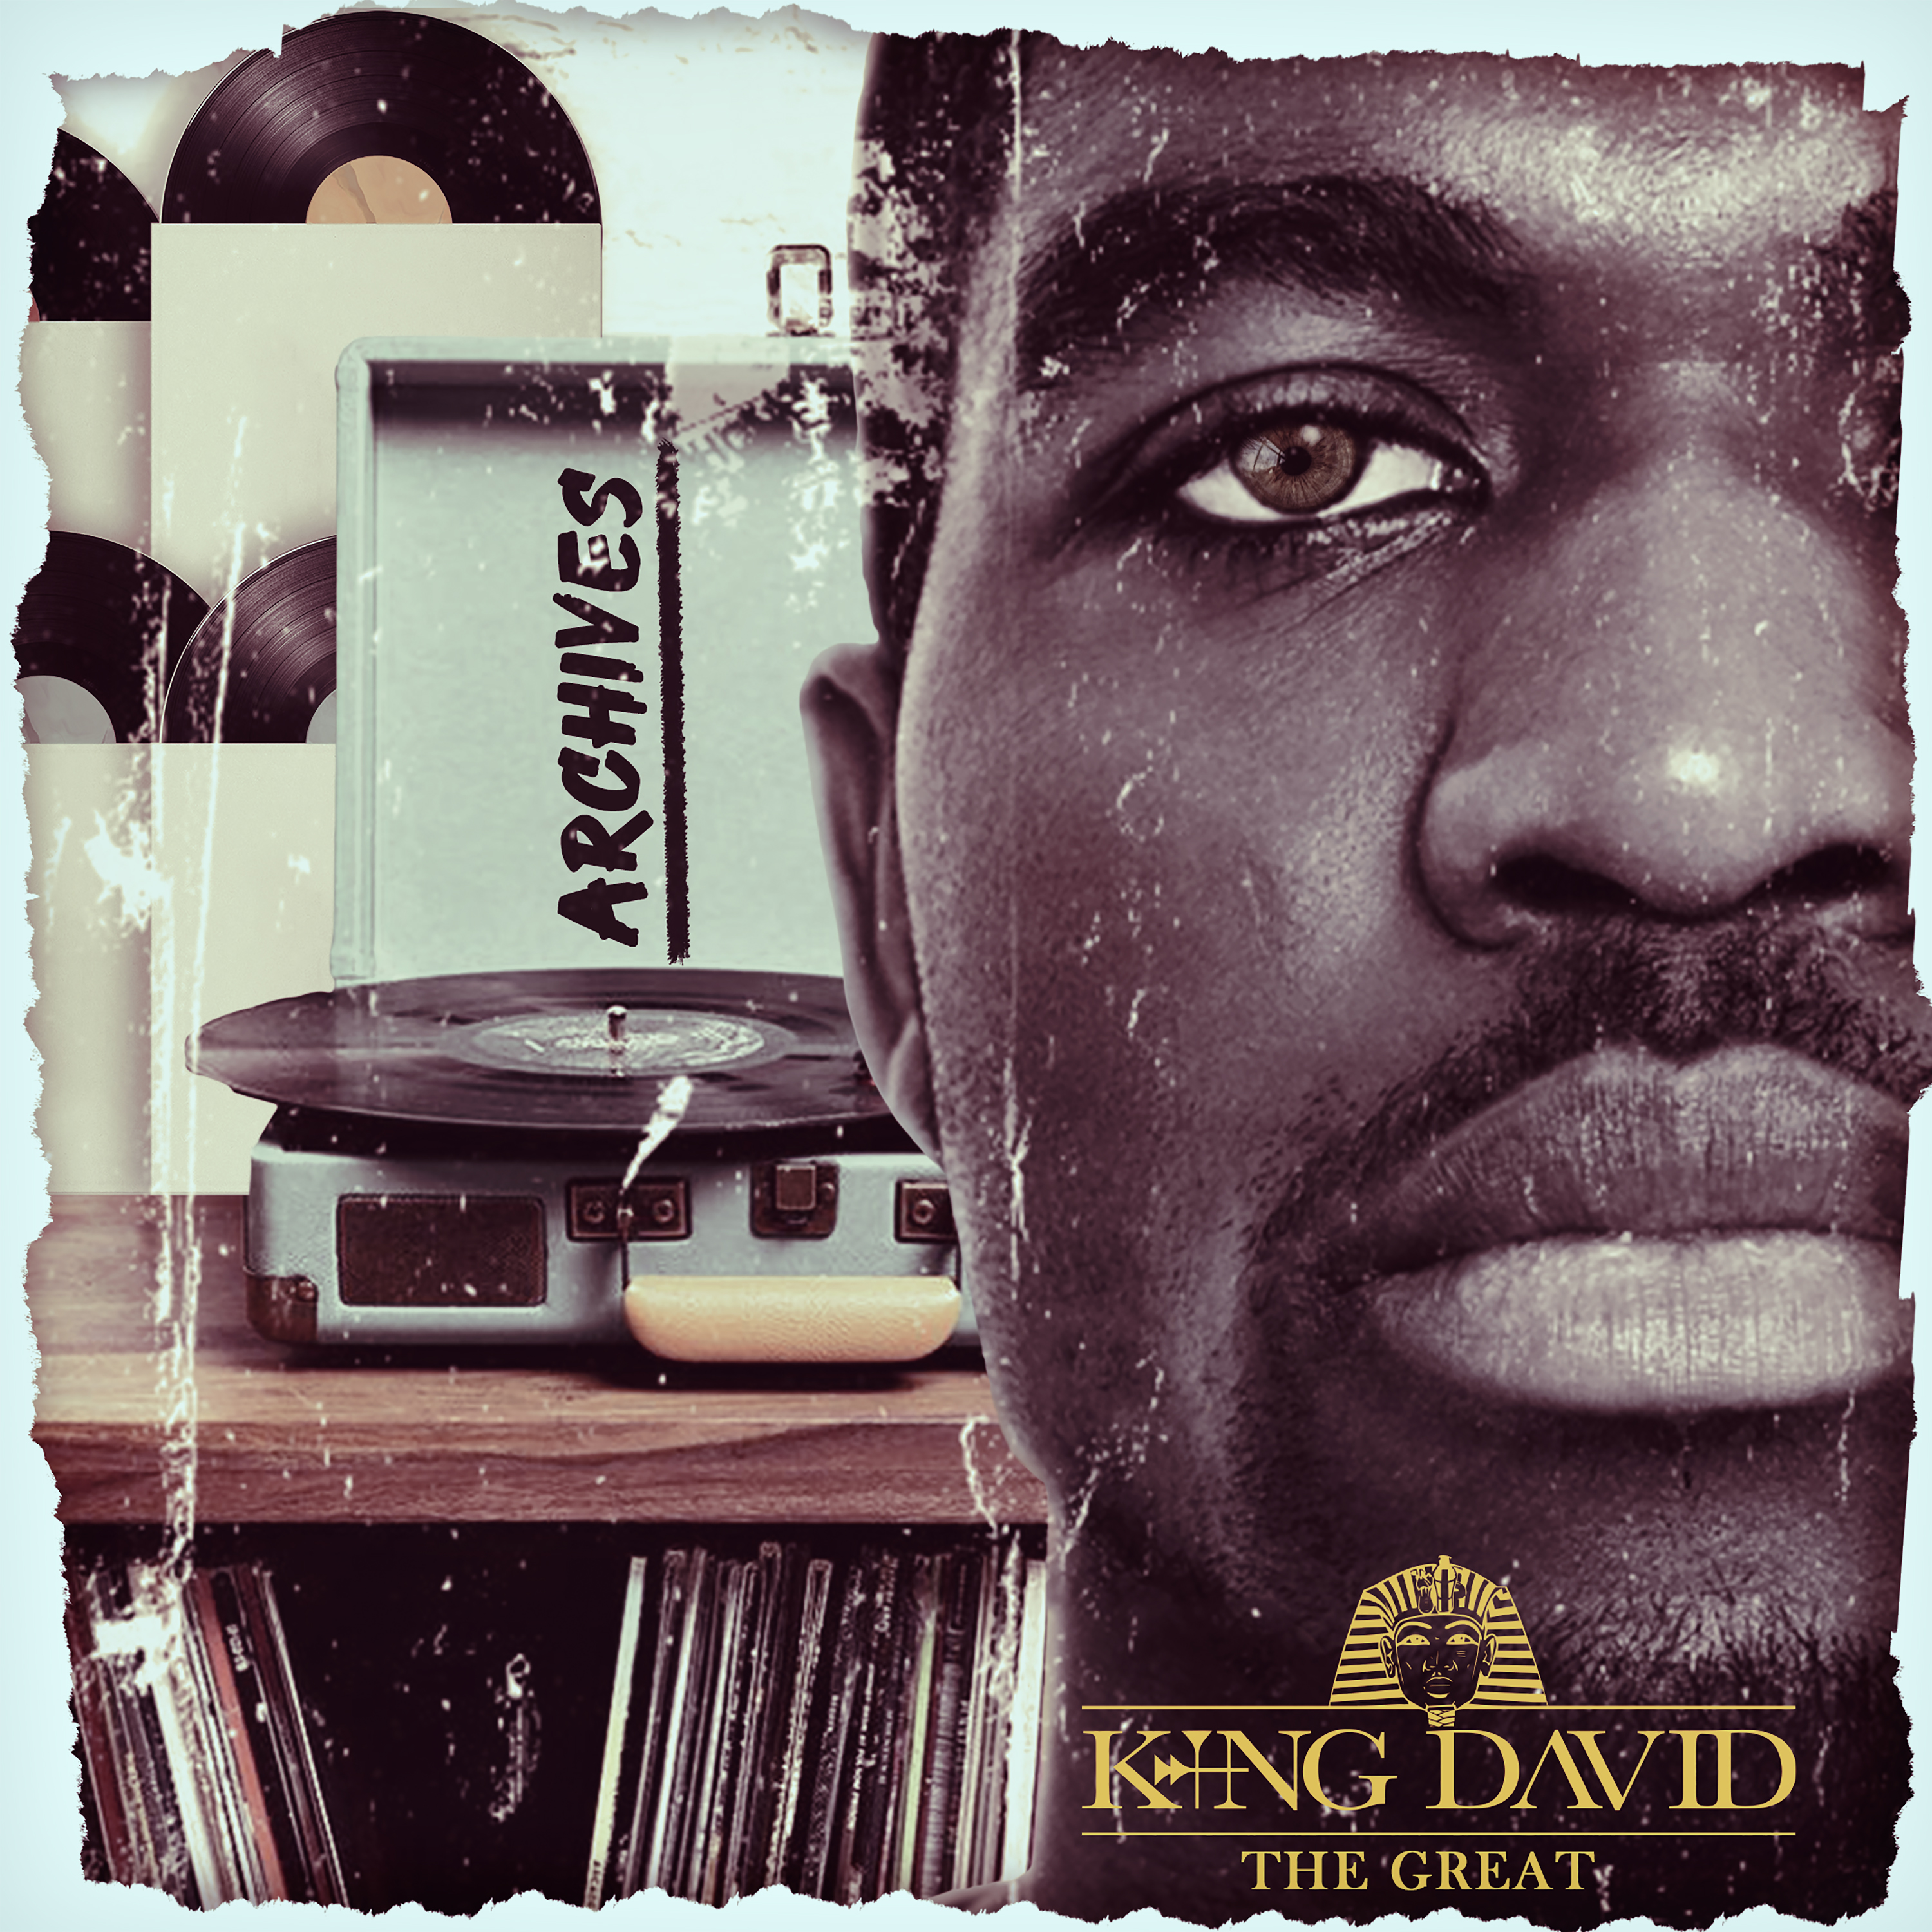 KING DAVID THE GREAT serves us with 9Tracks off his music catalog titled ARCHIVES